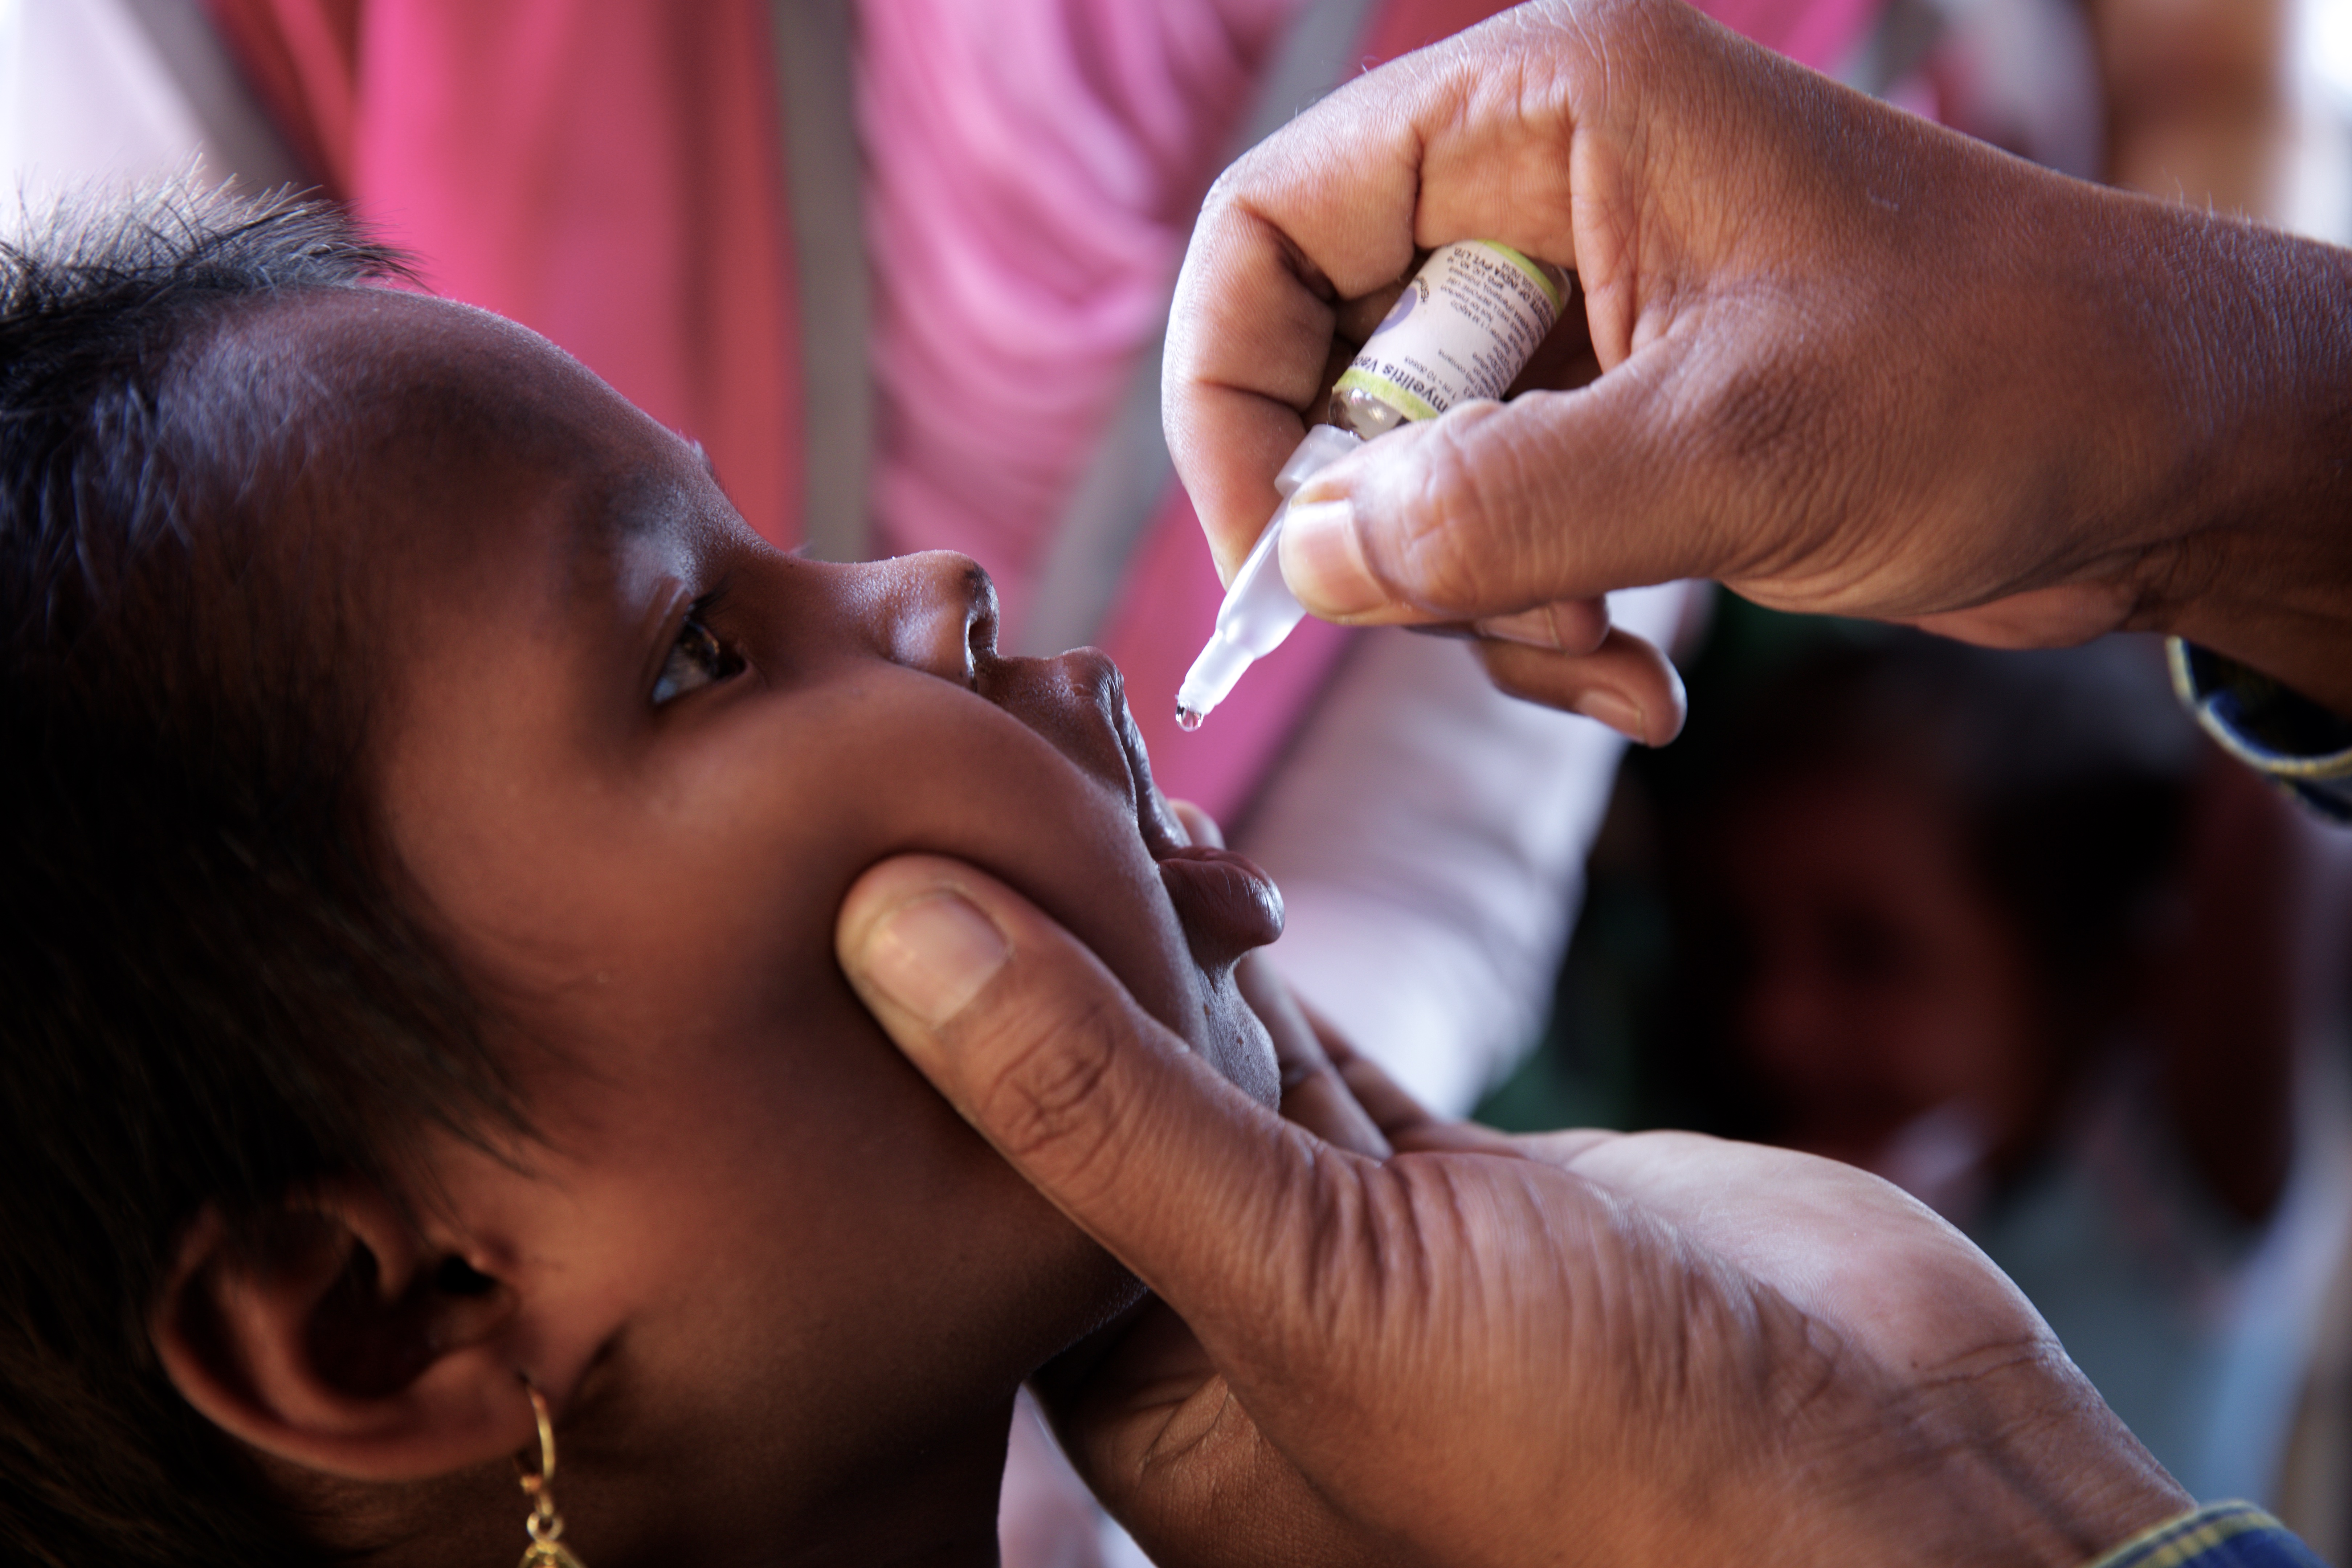 A Rohingya refugee child is administered an oral polio vaccine at an immunization centre in Bormapara makeshift settlement, Cox's Bazar district, Bangladesh, Thursday 21 December 2017